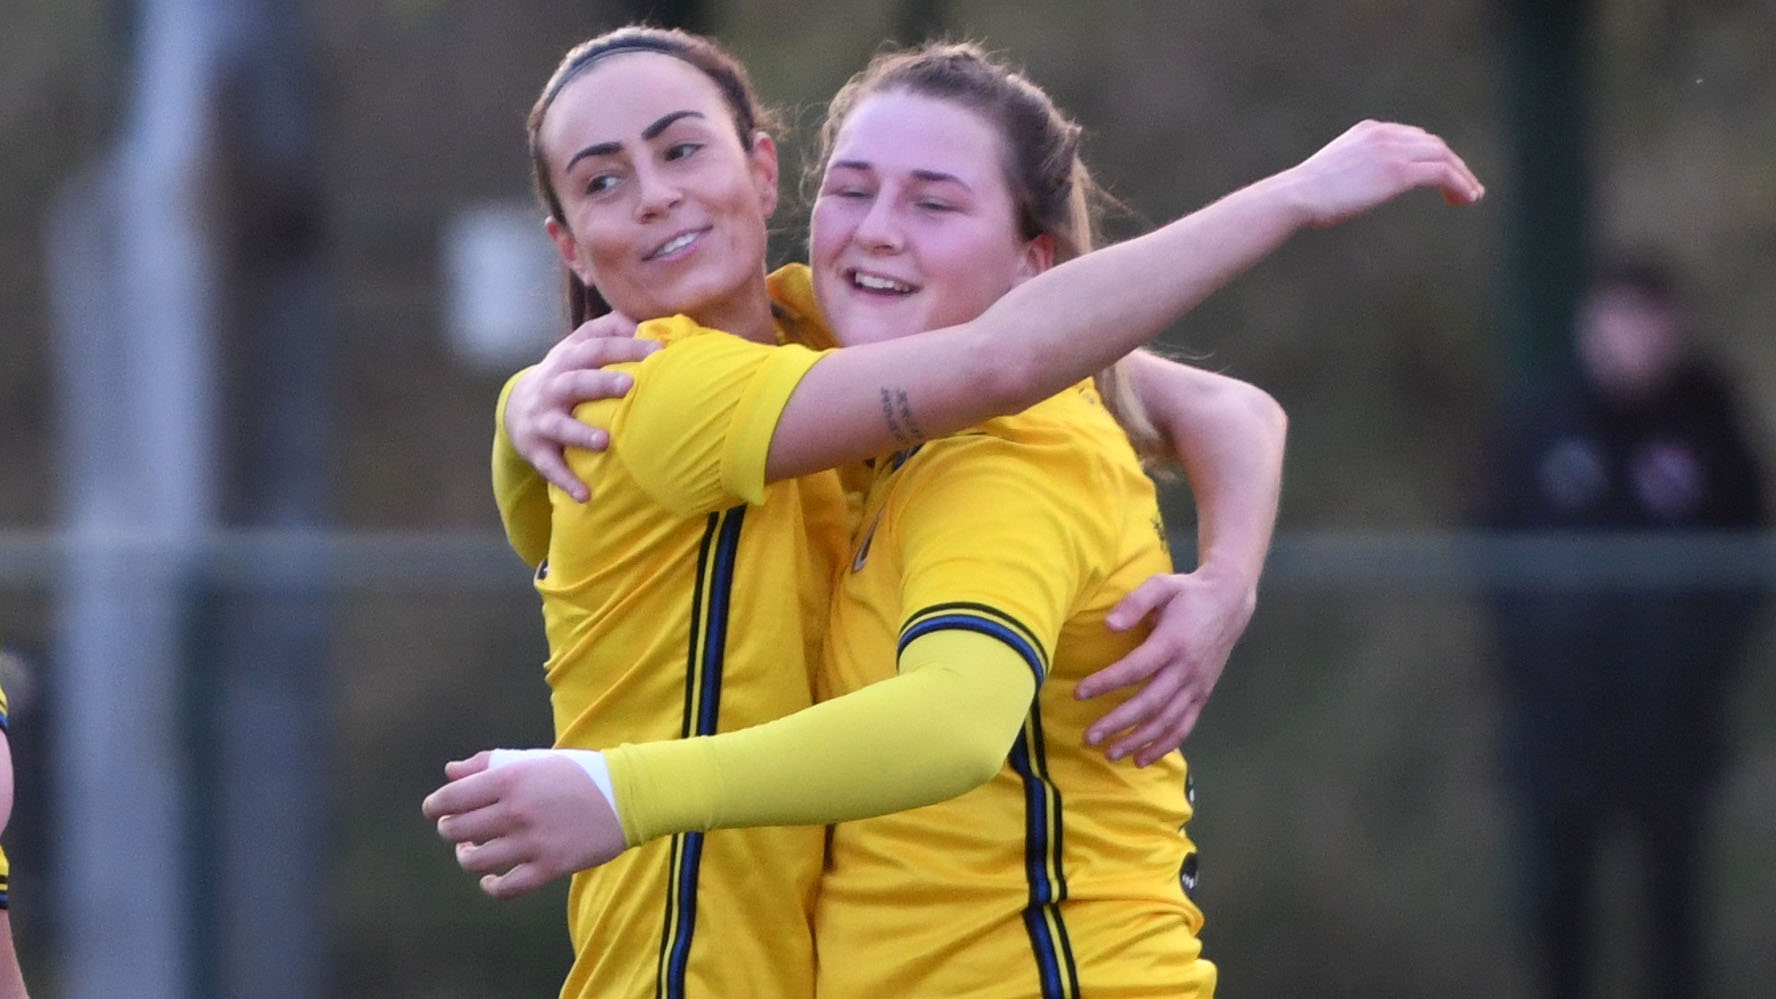 Alicia Powe and Chloe Chivers celebrate.